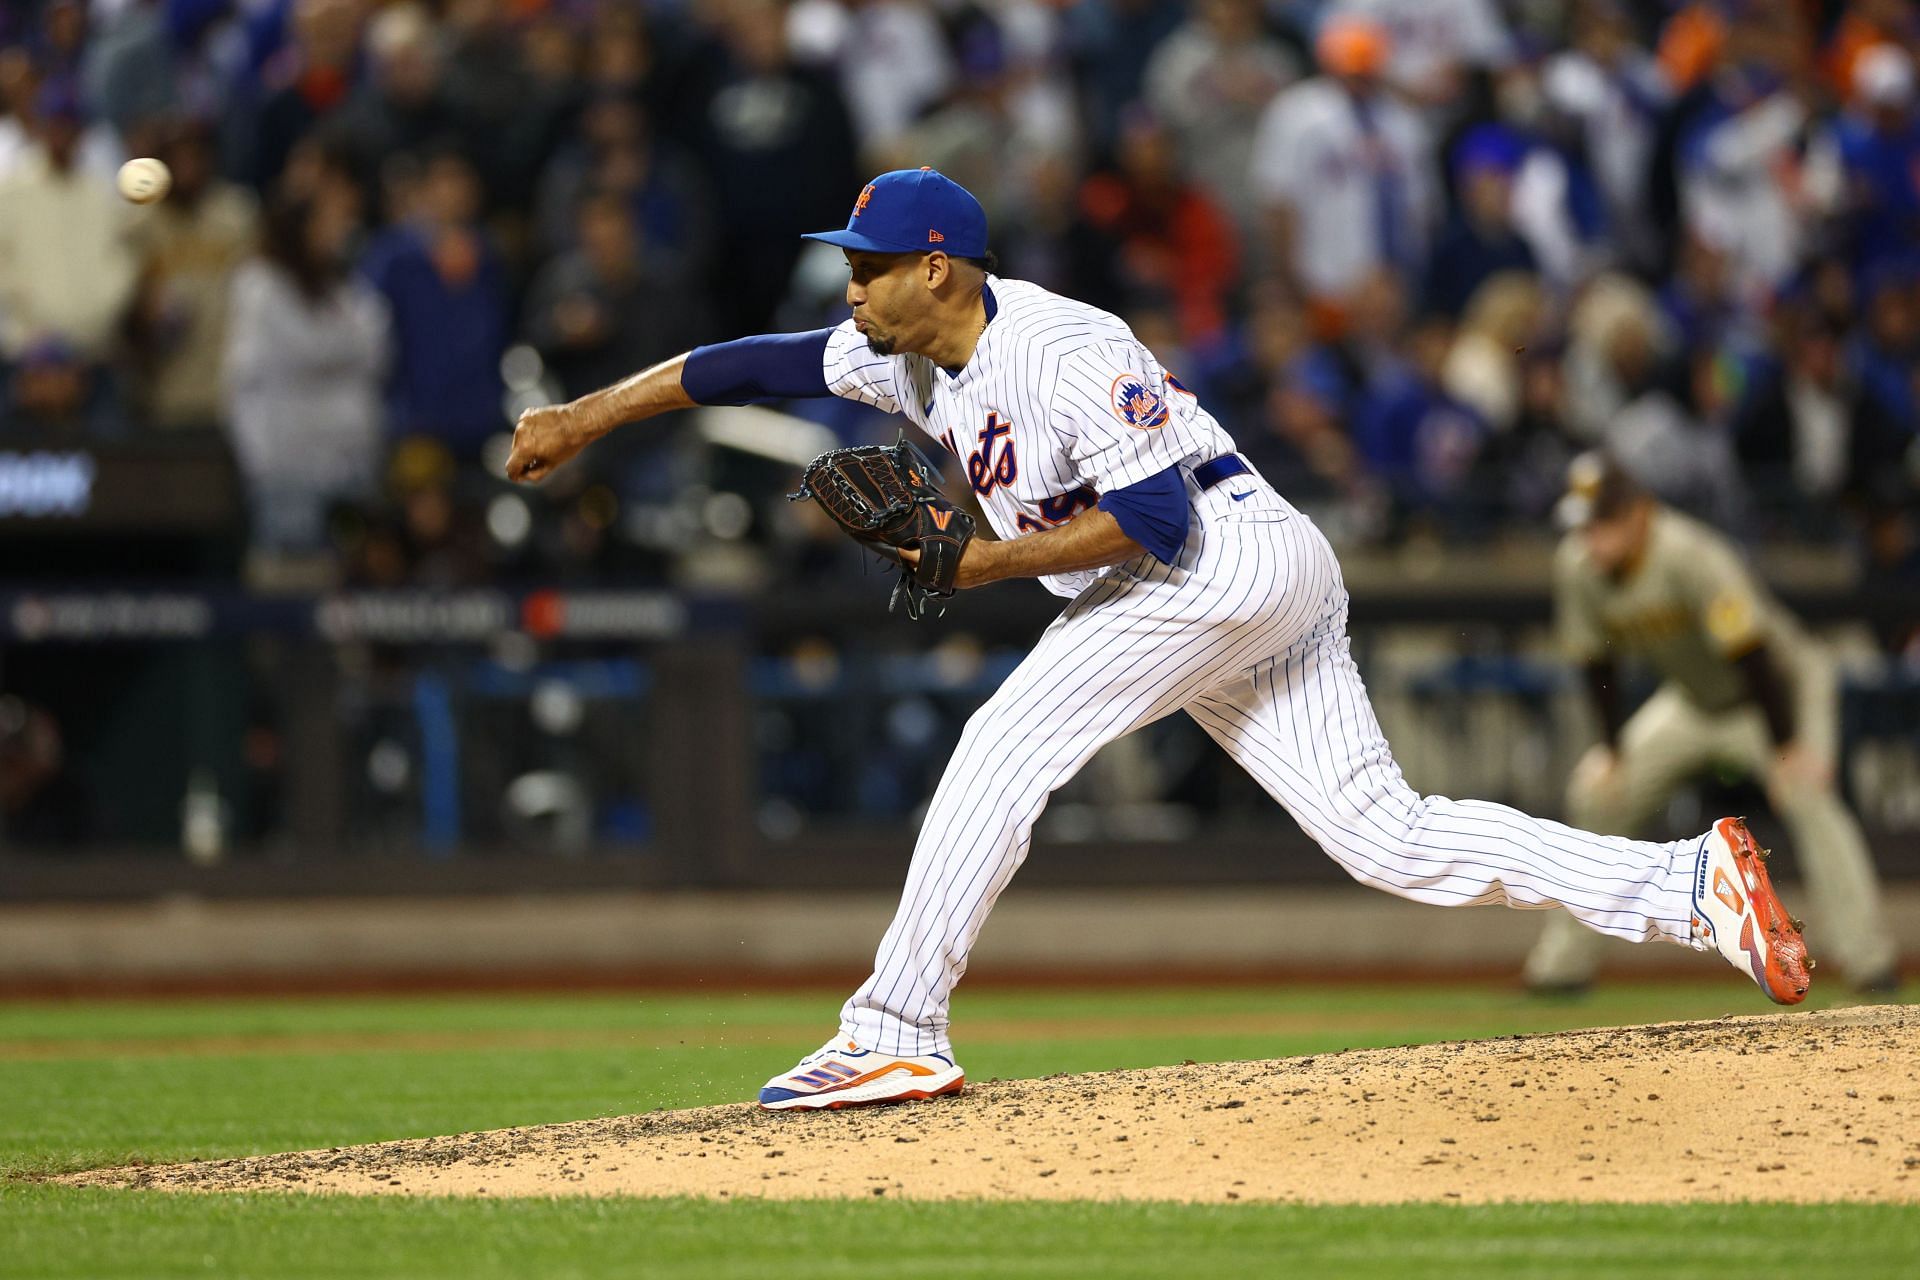 New York Mets closer Edwin Diaz plans to pile up the strikeouts this